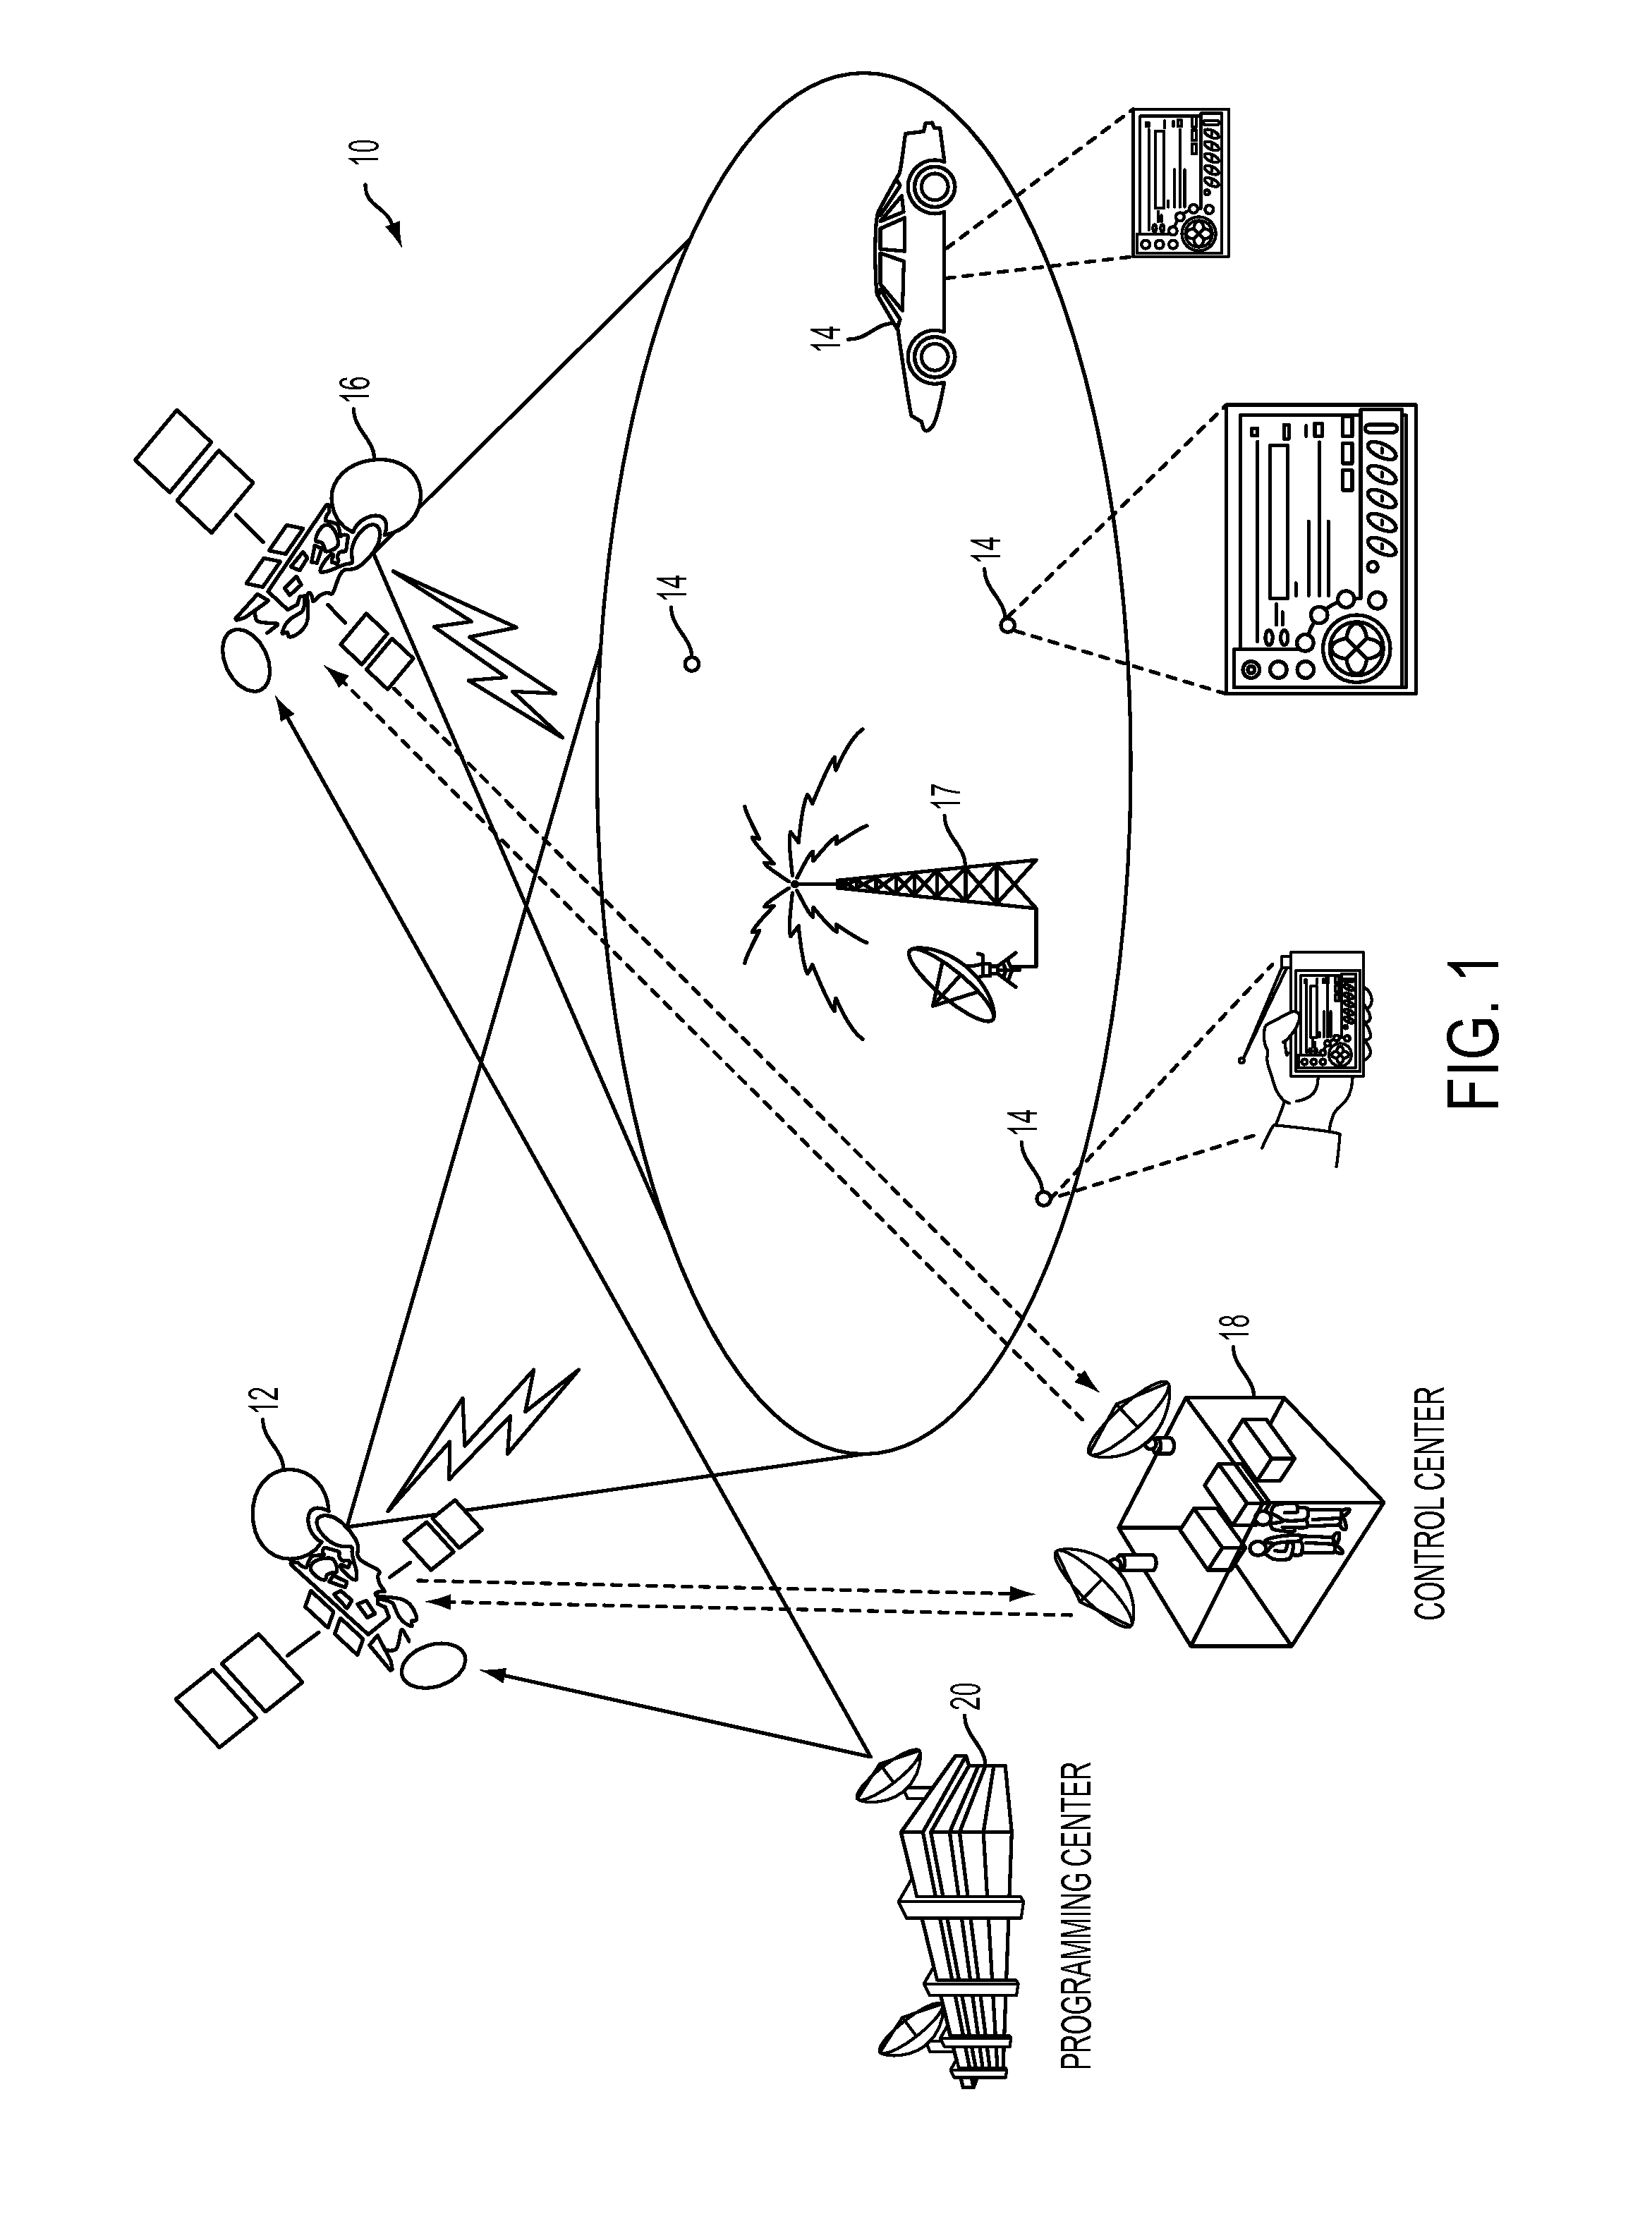 Method and apparatus for using selected content tracks from two or more program channels to automatically generate a blended mix channel for playback to a user upon selection of a corresponding preset button on a user interface